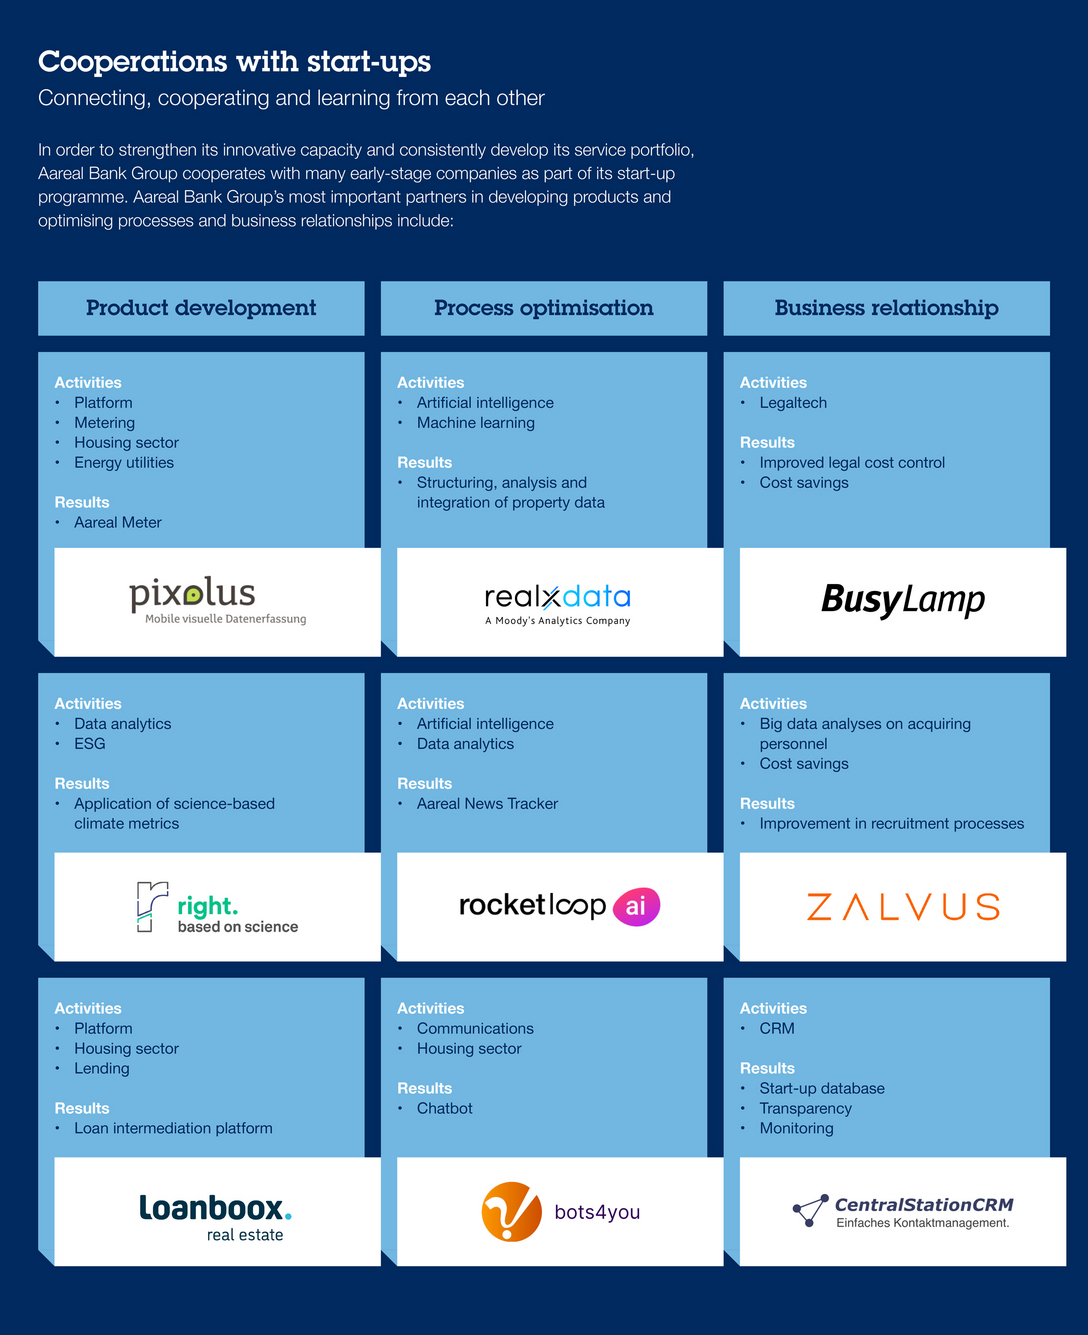 Graphic: “Aareal Bank’s cooperations with start-ups”.